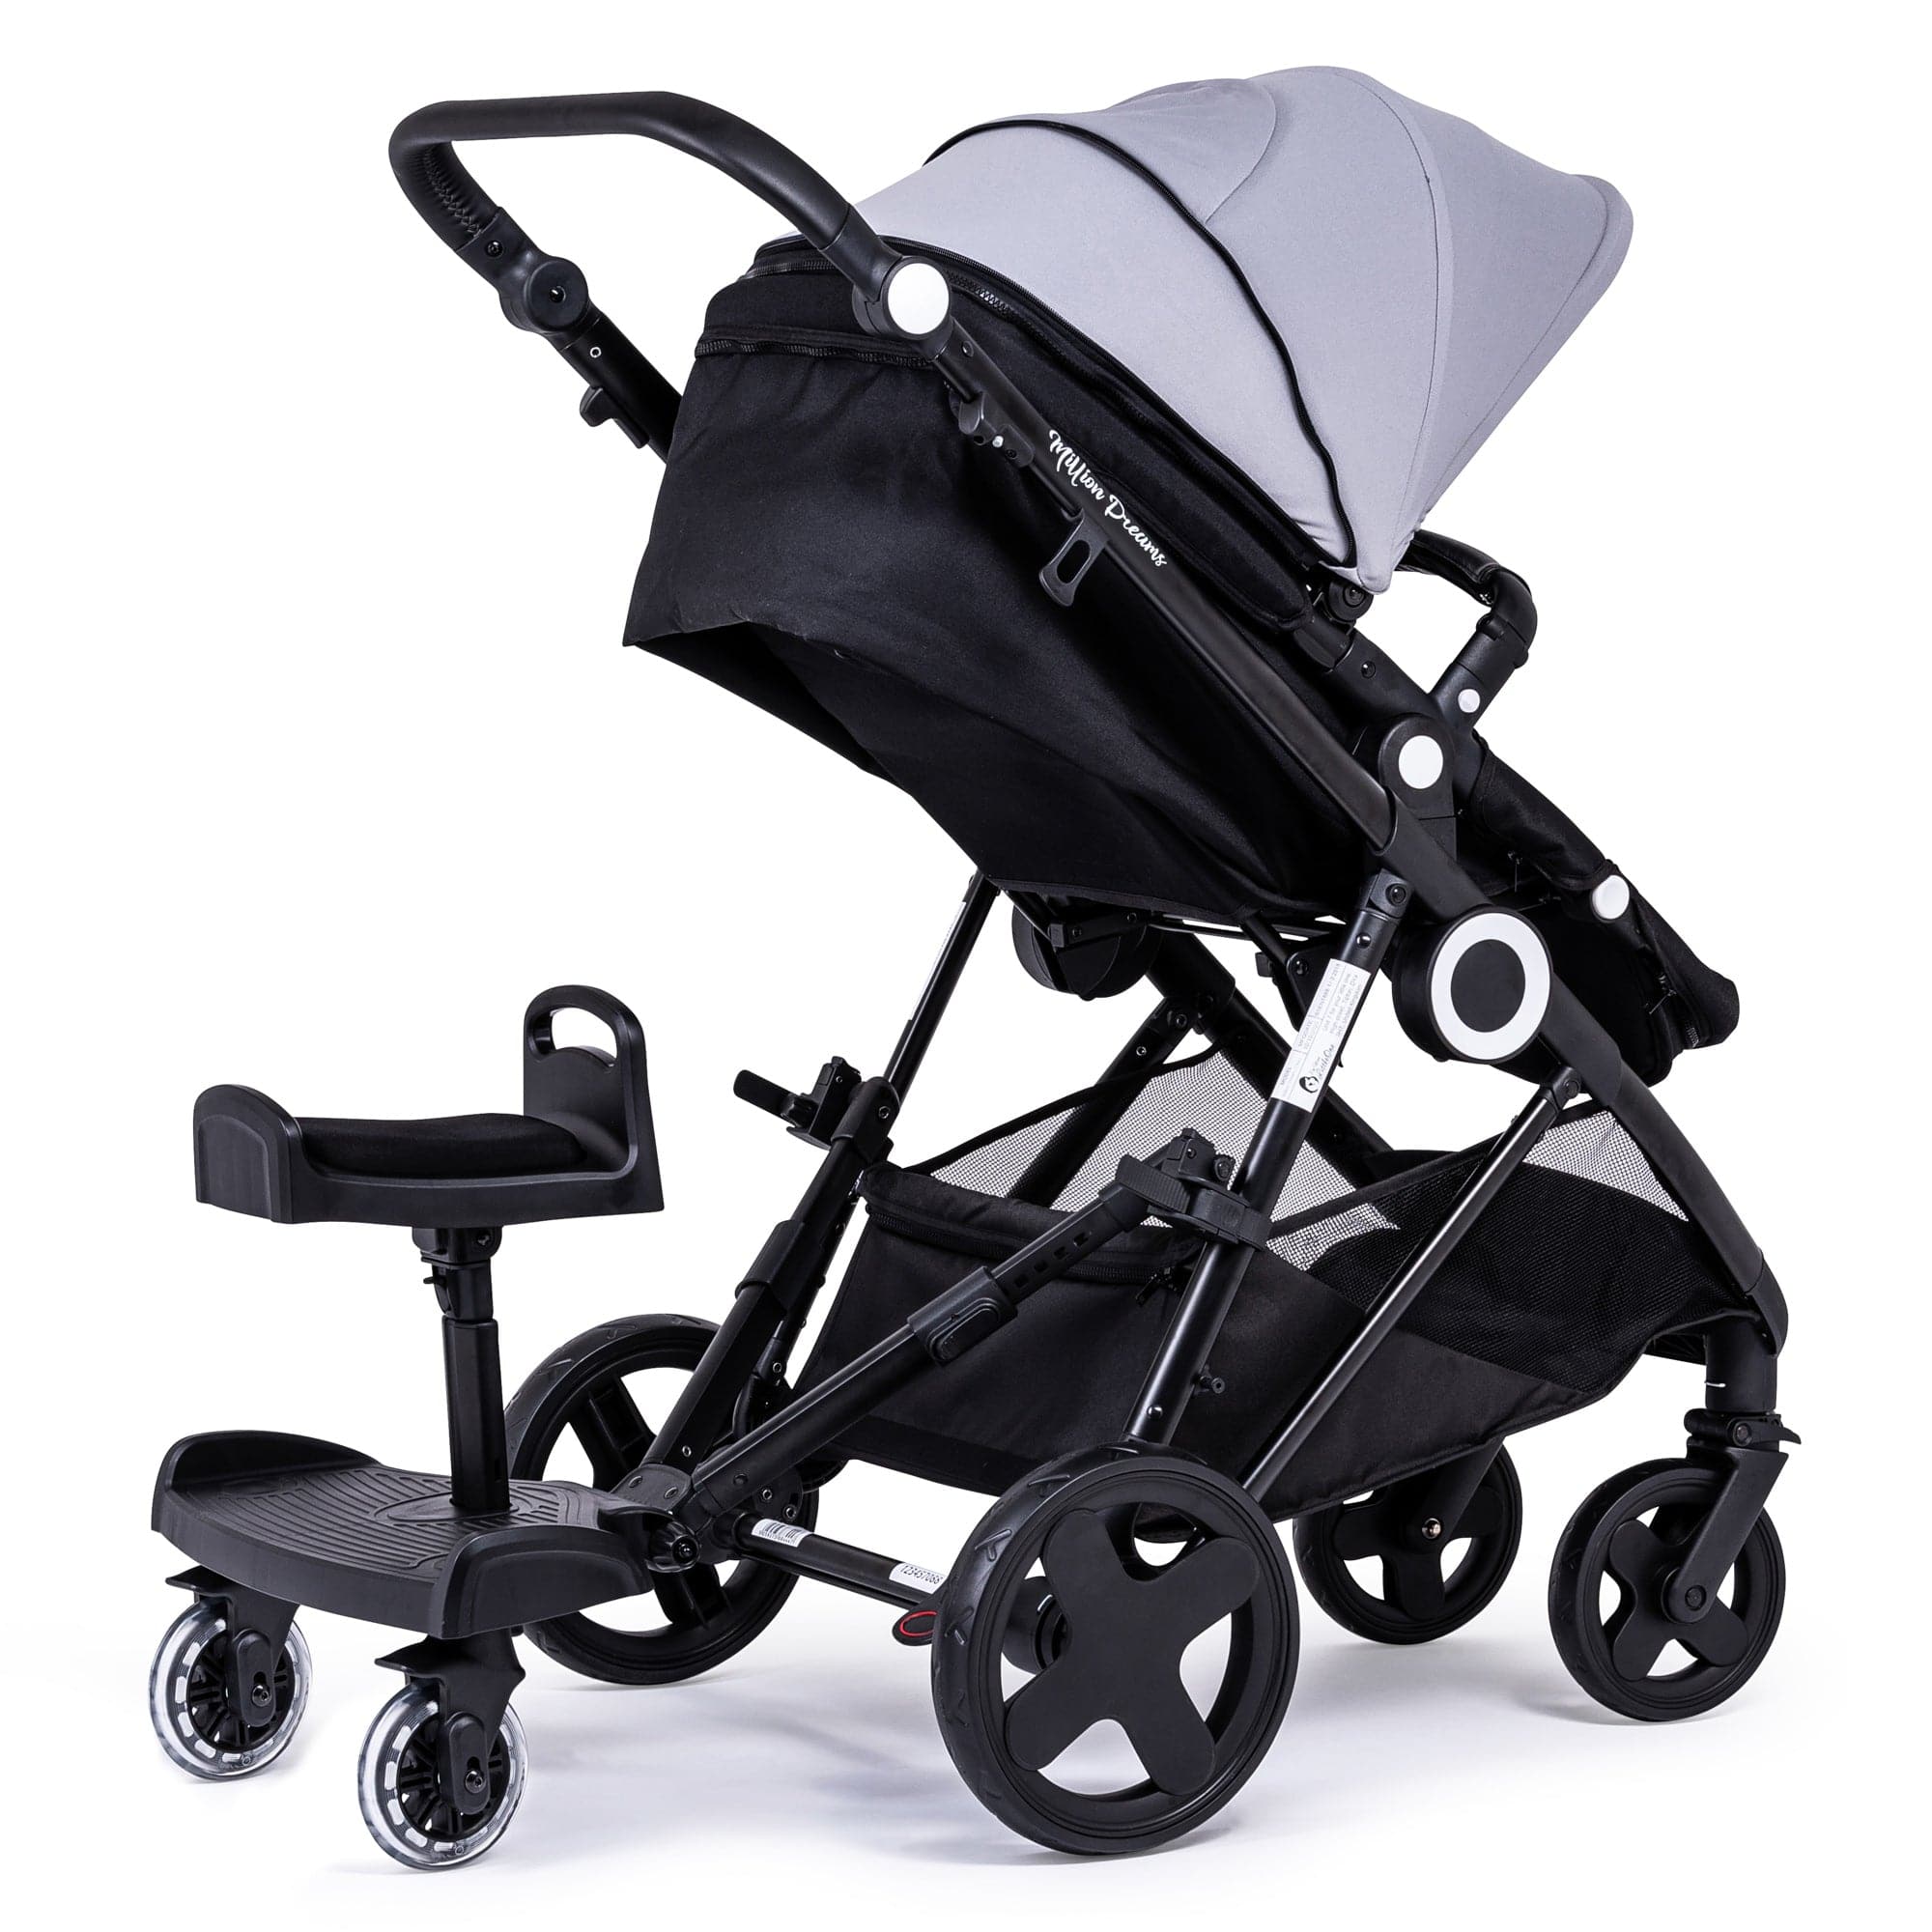 Ride On Board with Saddle Compatible with Baby Jogger - For Your Little One